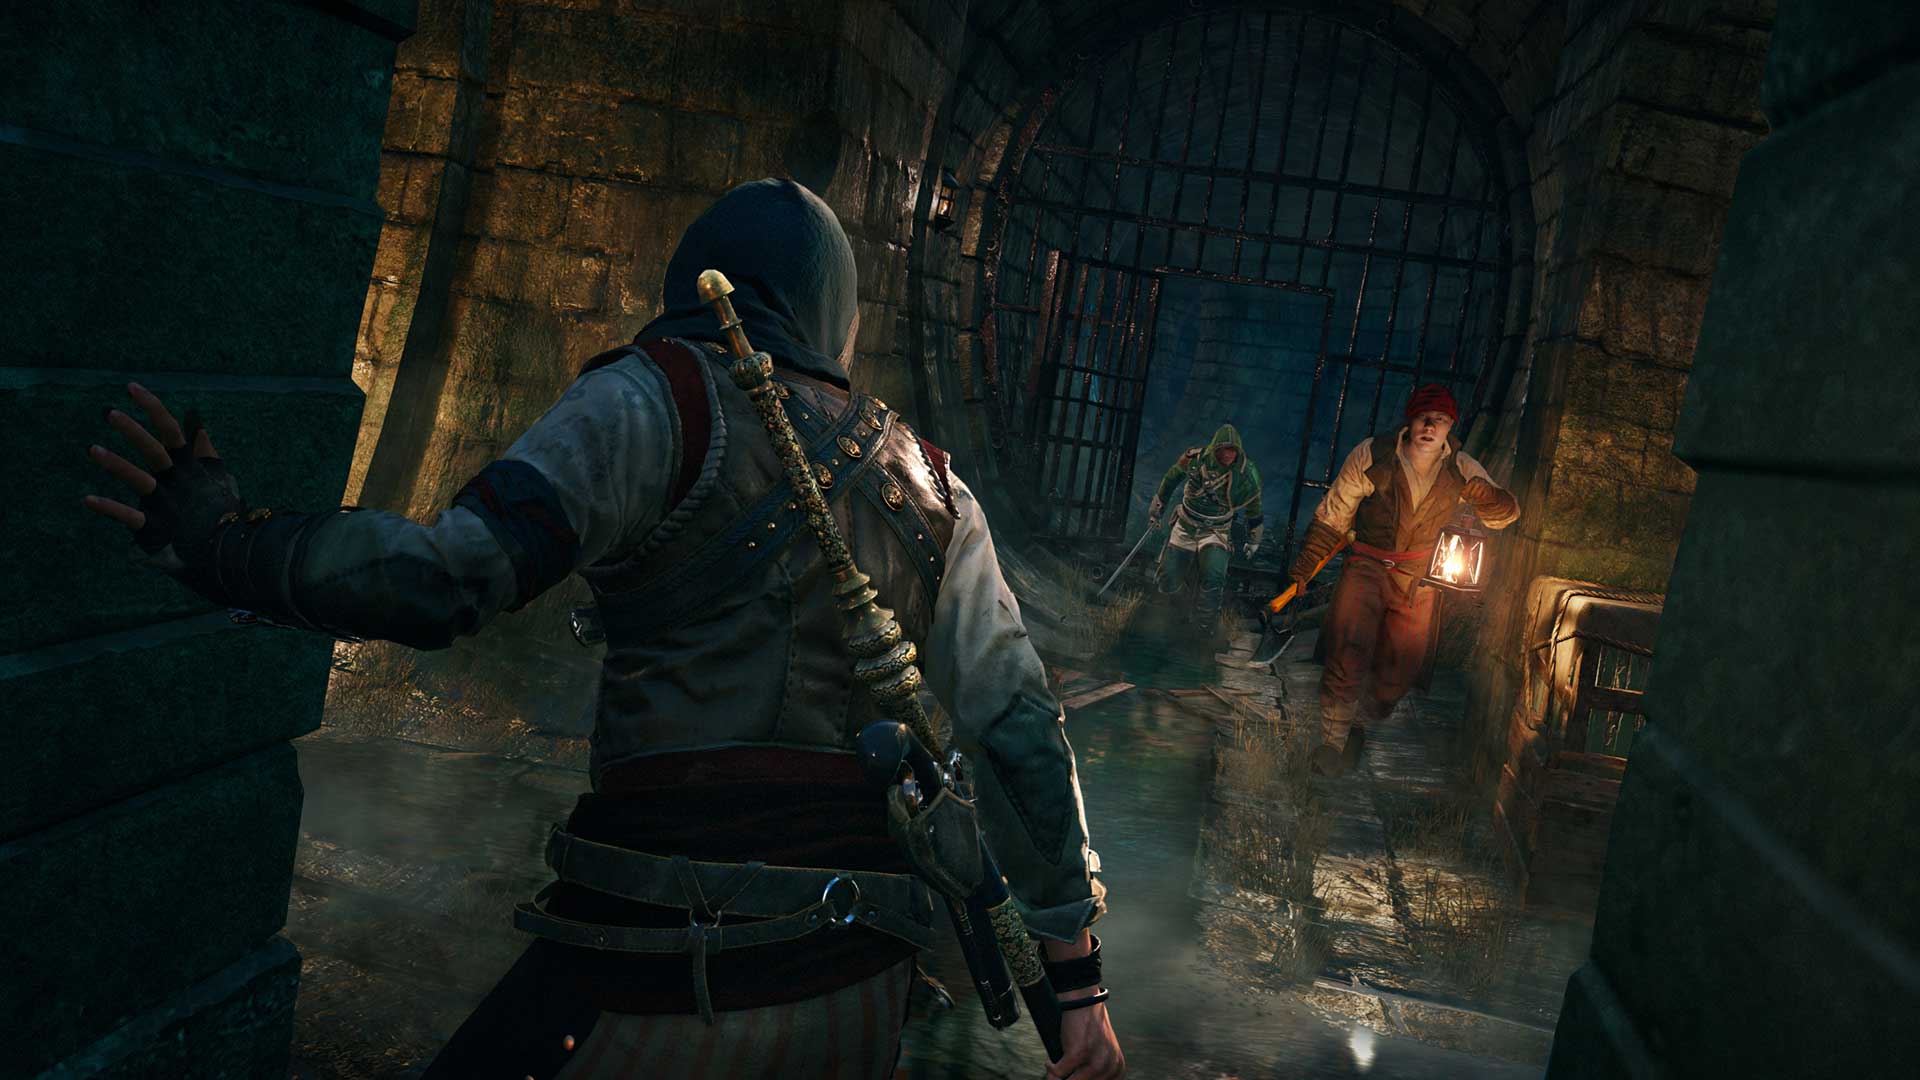 assassin's creed unity wallpaper hd,action adventure game,pc game,screenshot,adventure game,shooter game